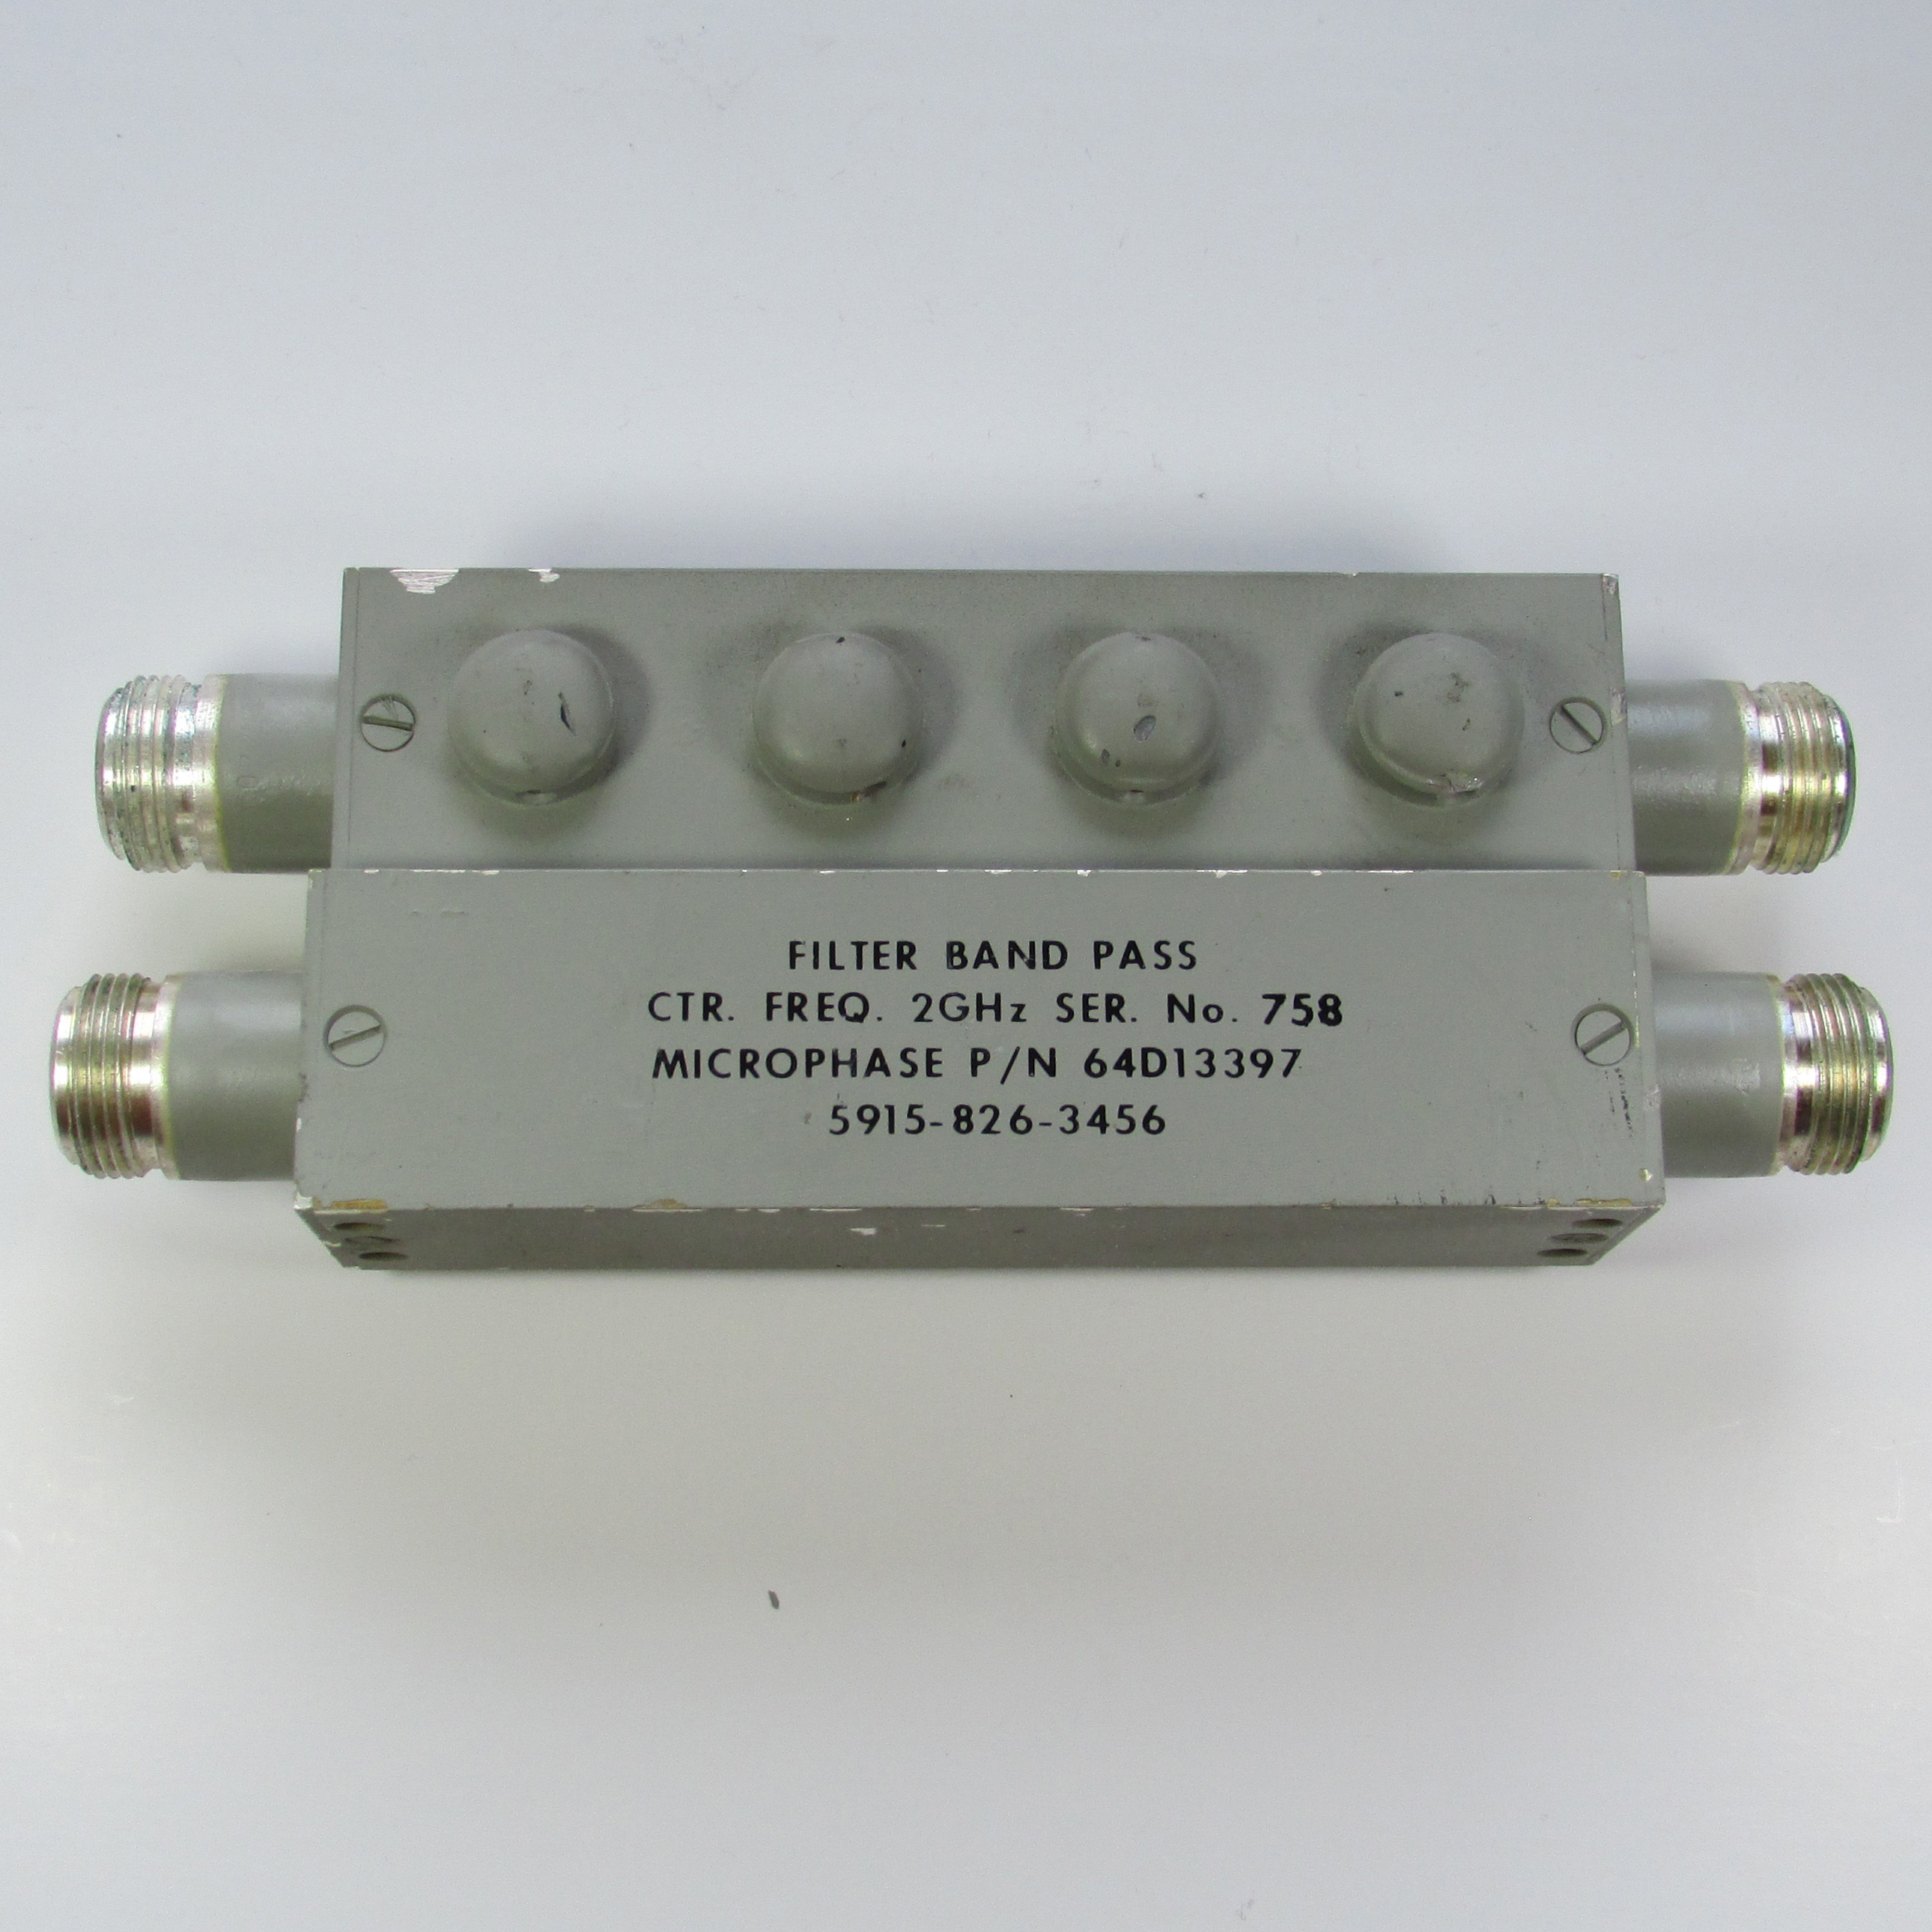 US MICROPHASE Center frequency: 2GHz N type RF coaxial bandpass filter